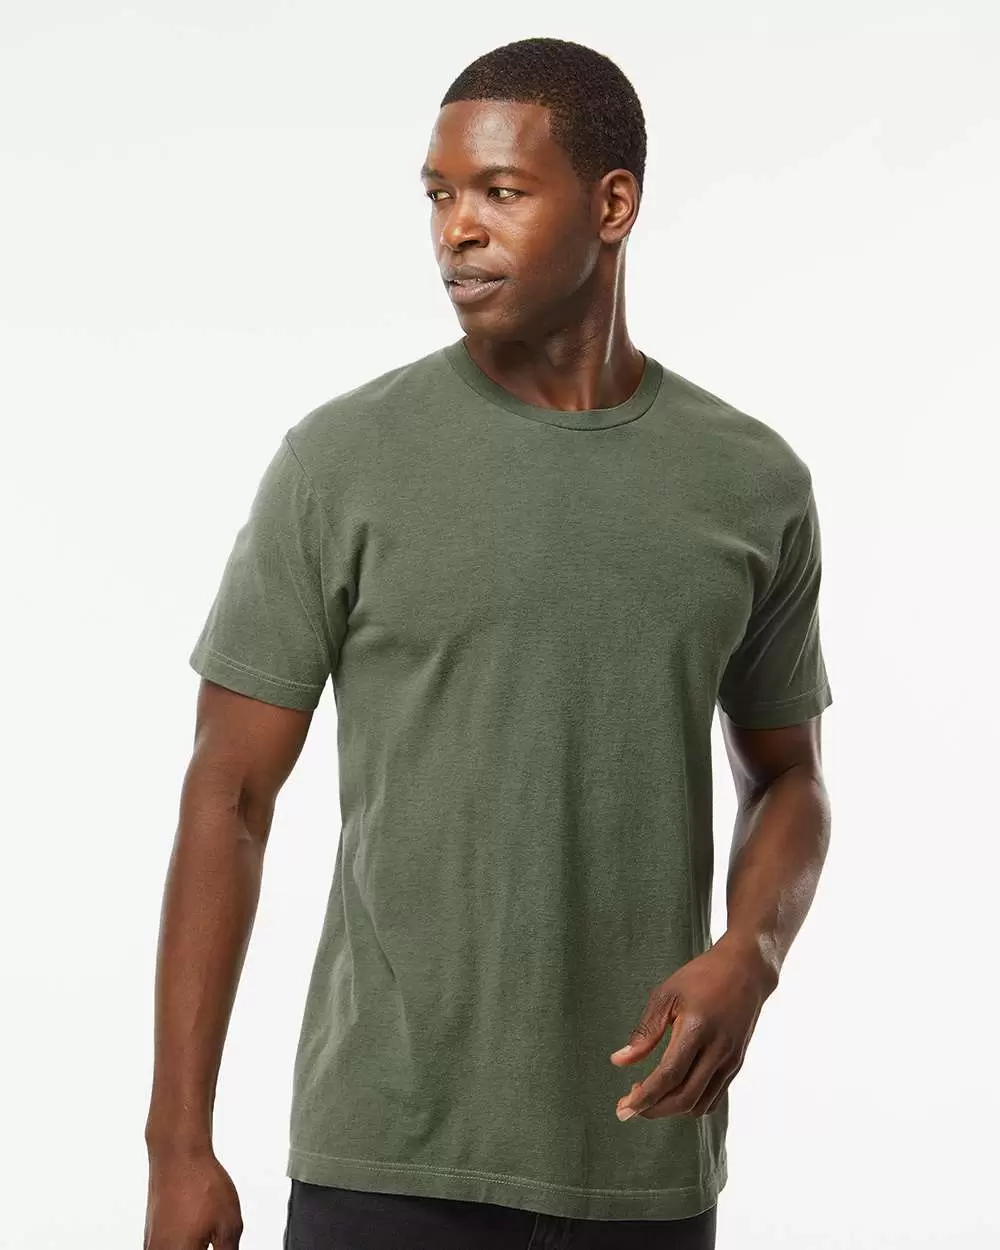 M&O Knits 6500M Unisex Vintage Garment-Dyed T-Shirt - From $5.94